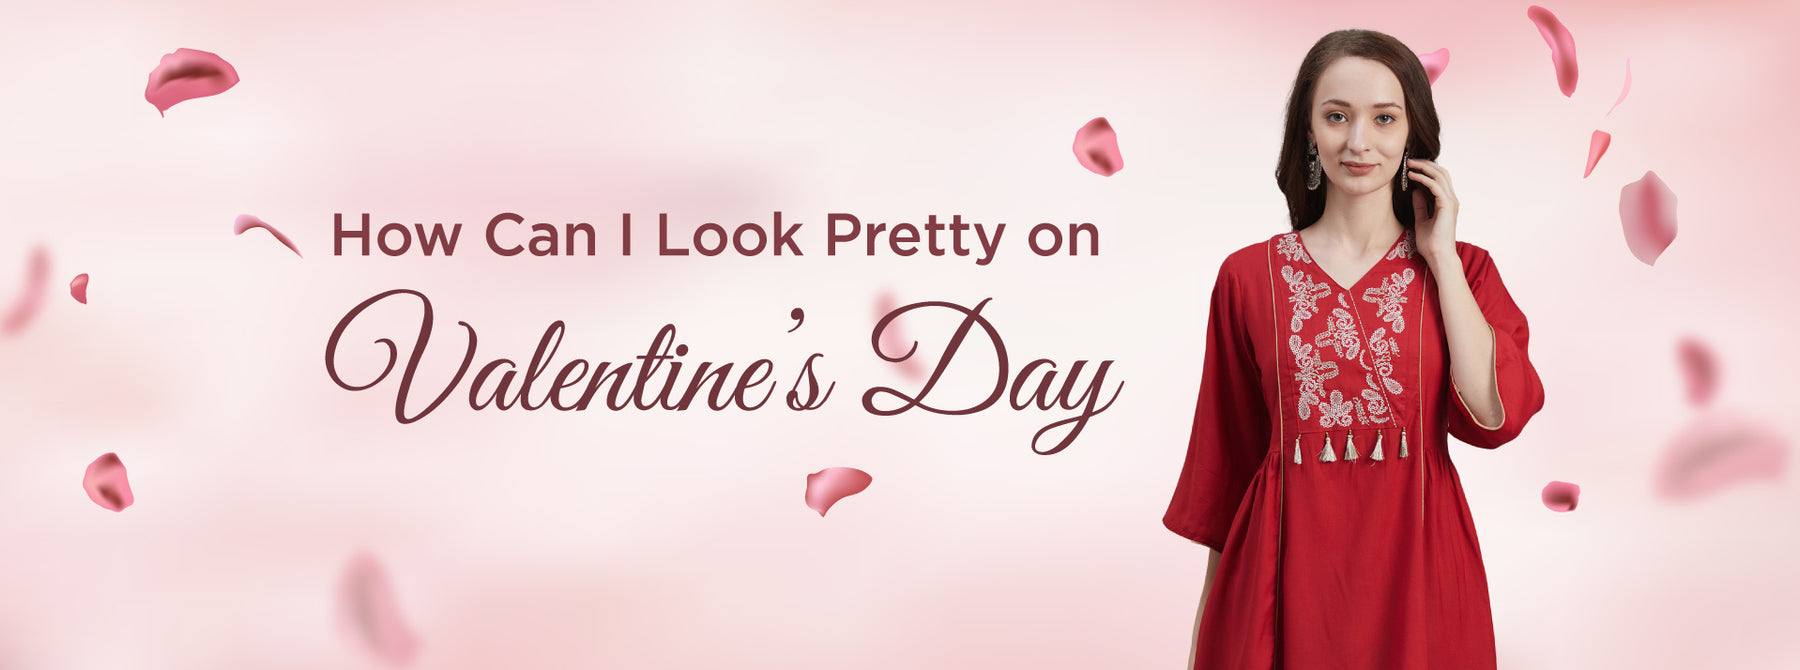 How Can I Look Pretty on Valentine’s Day?